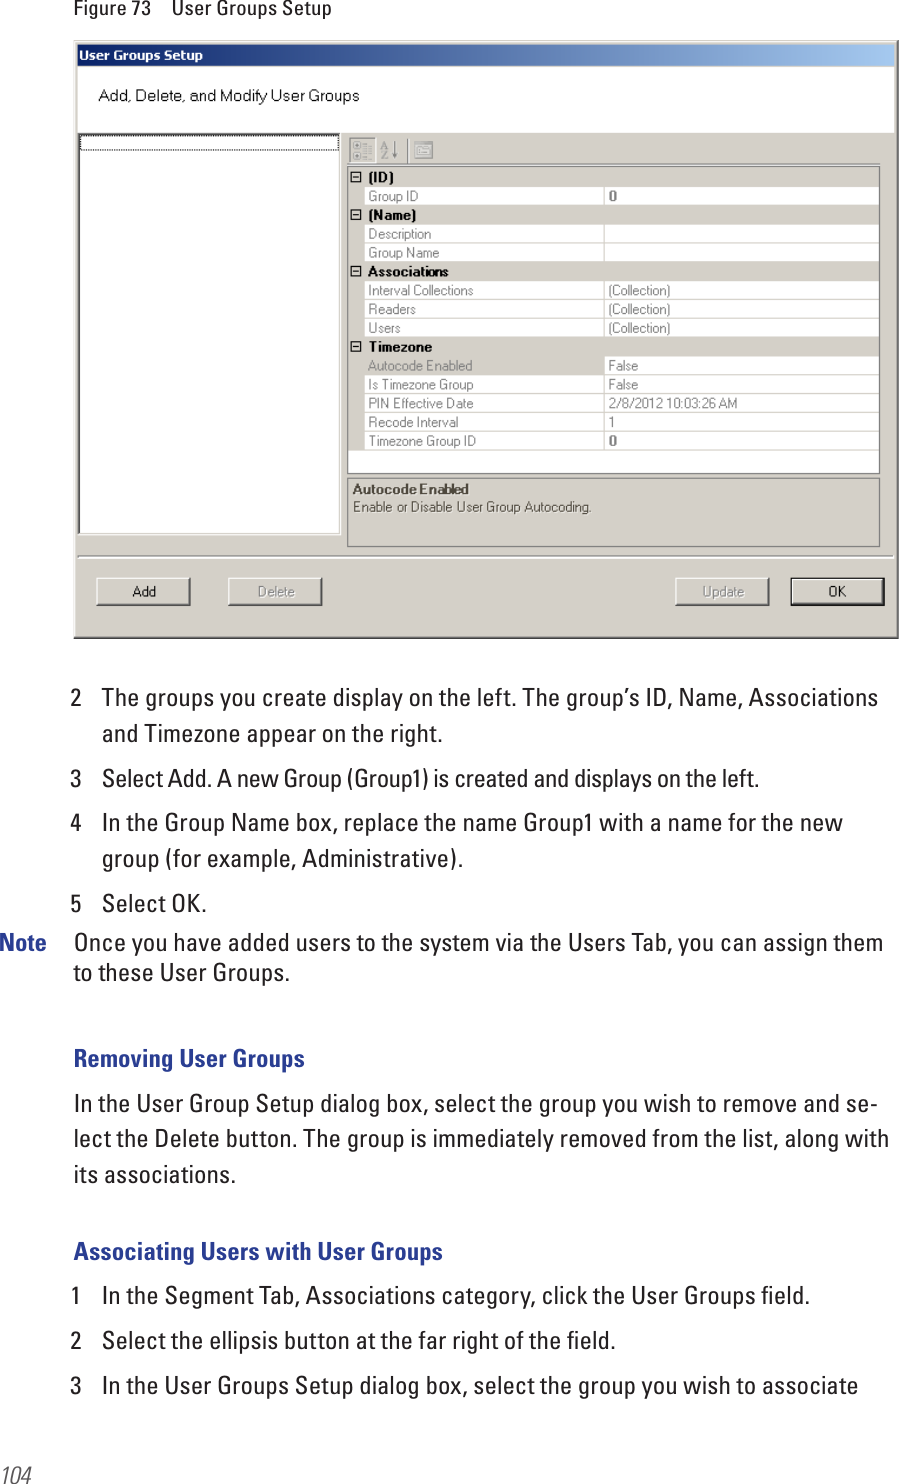 104Figure 73  User Groups Setup2  The groups you create display on the left. The group’s ID, Name, Associations and Timezone appear on the right. 3  Select Add. A new Group (Group1) is created and displays on the left.4  In the Group Name box, replace the name Group1 with a name for the new group (for example, Administrative).5  Select OK.Note  Once you have added users to the system via the Users Tab, you can assign them to these User Groups. Removing User GroupsIn the User Group Setup dialog box, select the group you wish to remove and se-lect the Delete button. The group is immediately removed from the list, along with its associations.Associating Users with User Groups1  In the Segment Tab, Associations category, click the User Groups ﬁeld.2  Select the ellipsis button at the far right of the ﬁeld. 3  In the User Groups Setup dialog box, select the group you wish to associate 